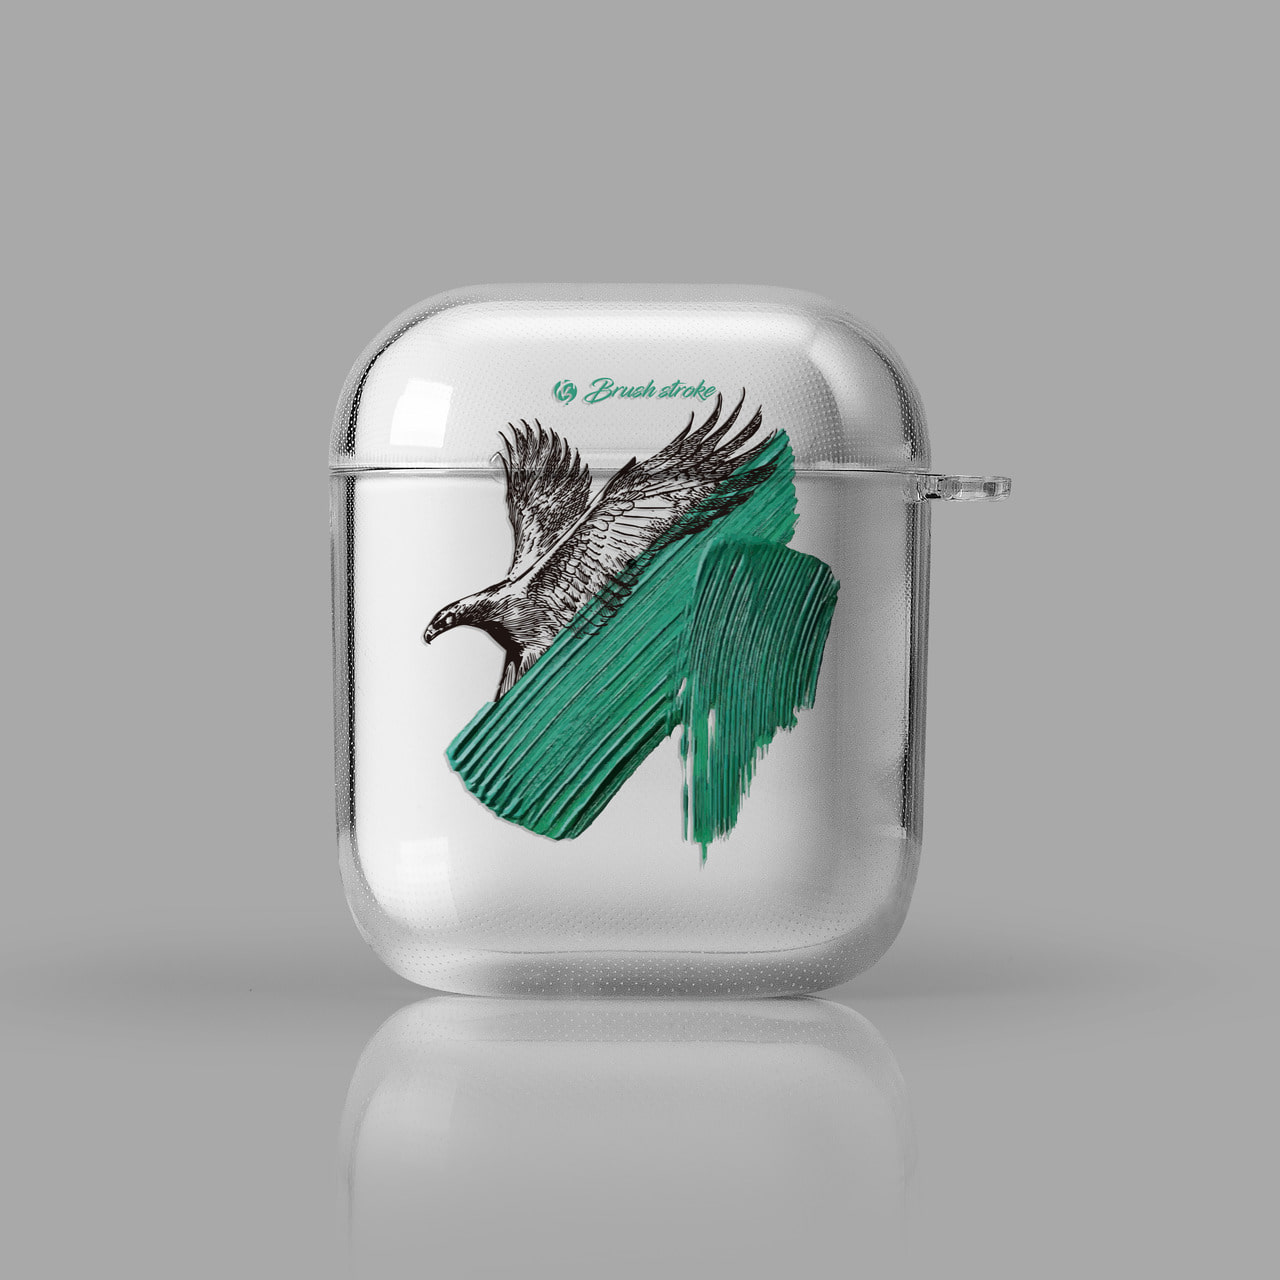 [Airpods cases] Brushstrokes No.17